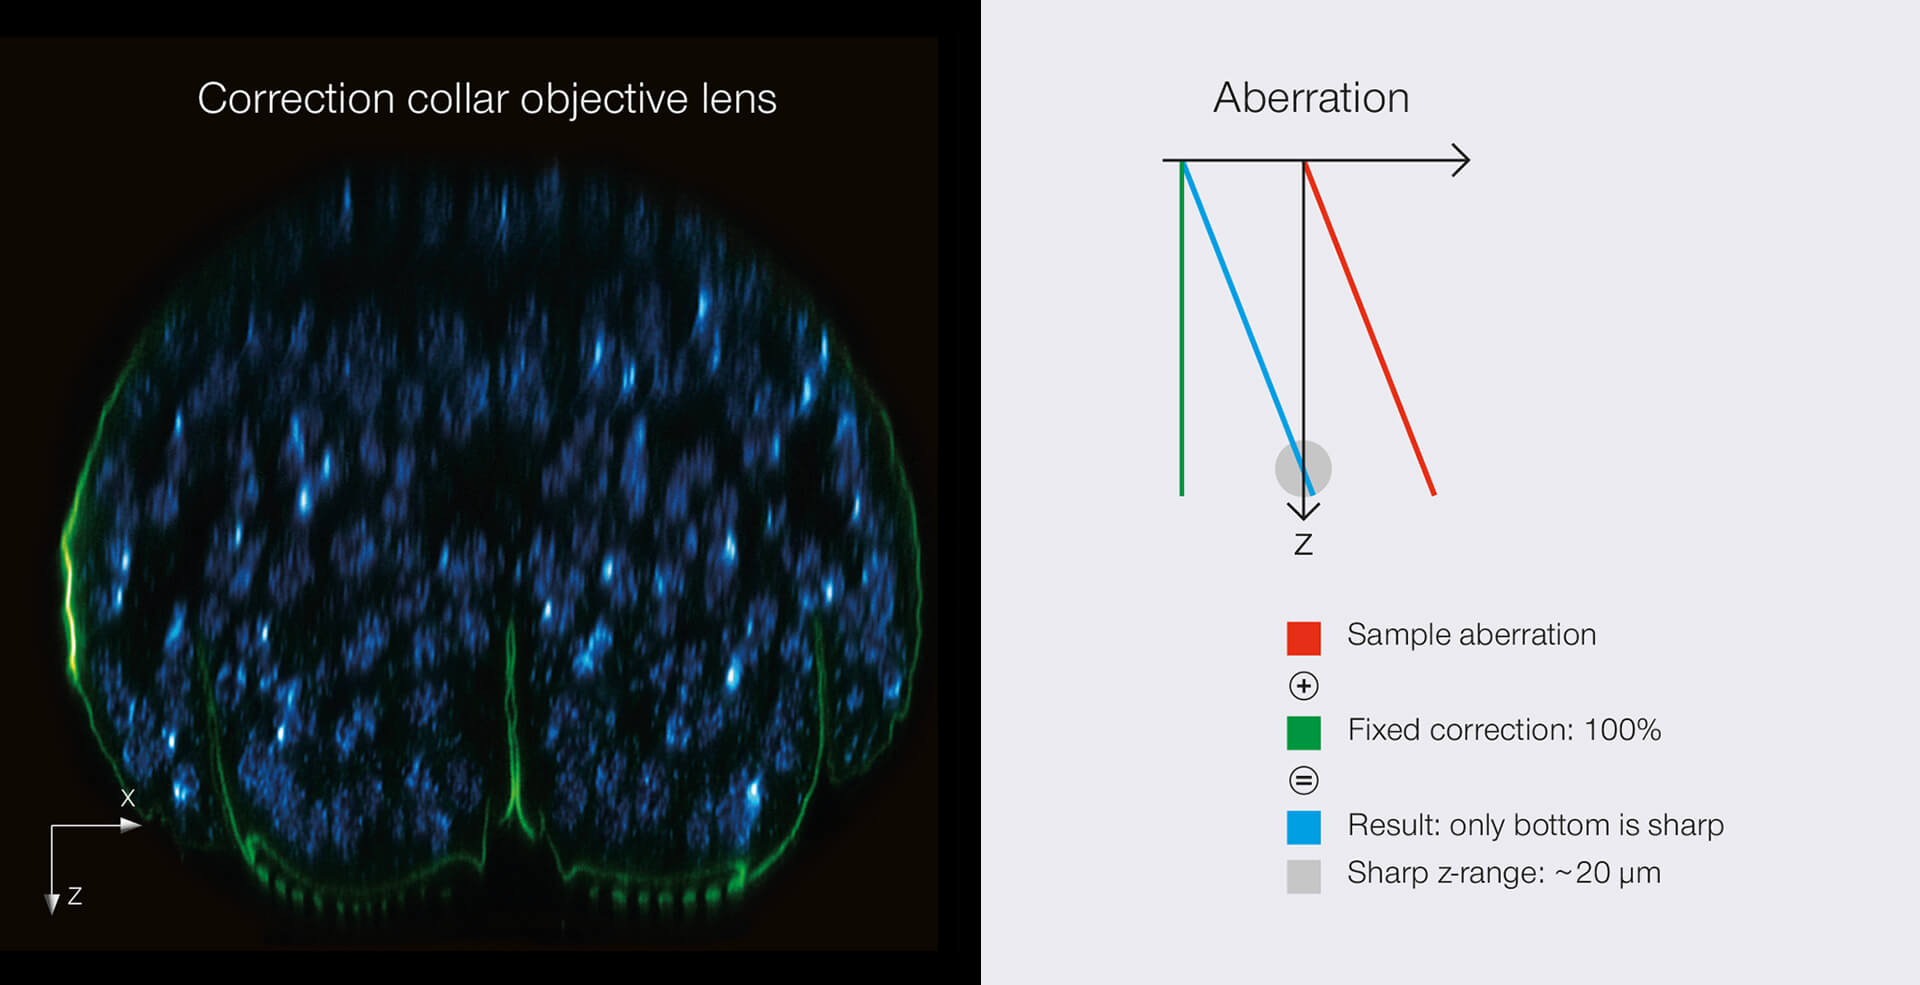 Comparison of RAYSHAPE deformable mirror vs correction collar objective lens. xz section of a stage 17 Drosophila embryo stained for chitin (abberior LIVE 610, green) and DNA (abberior LIVE 550, cyan). Position deep.